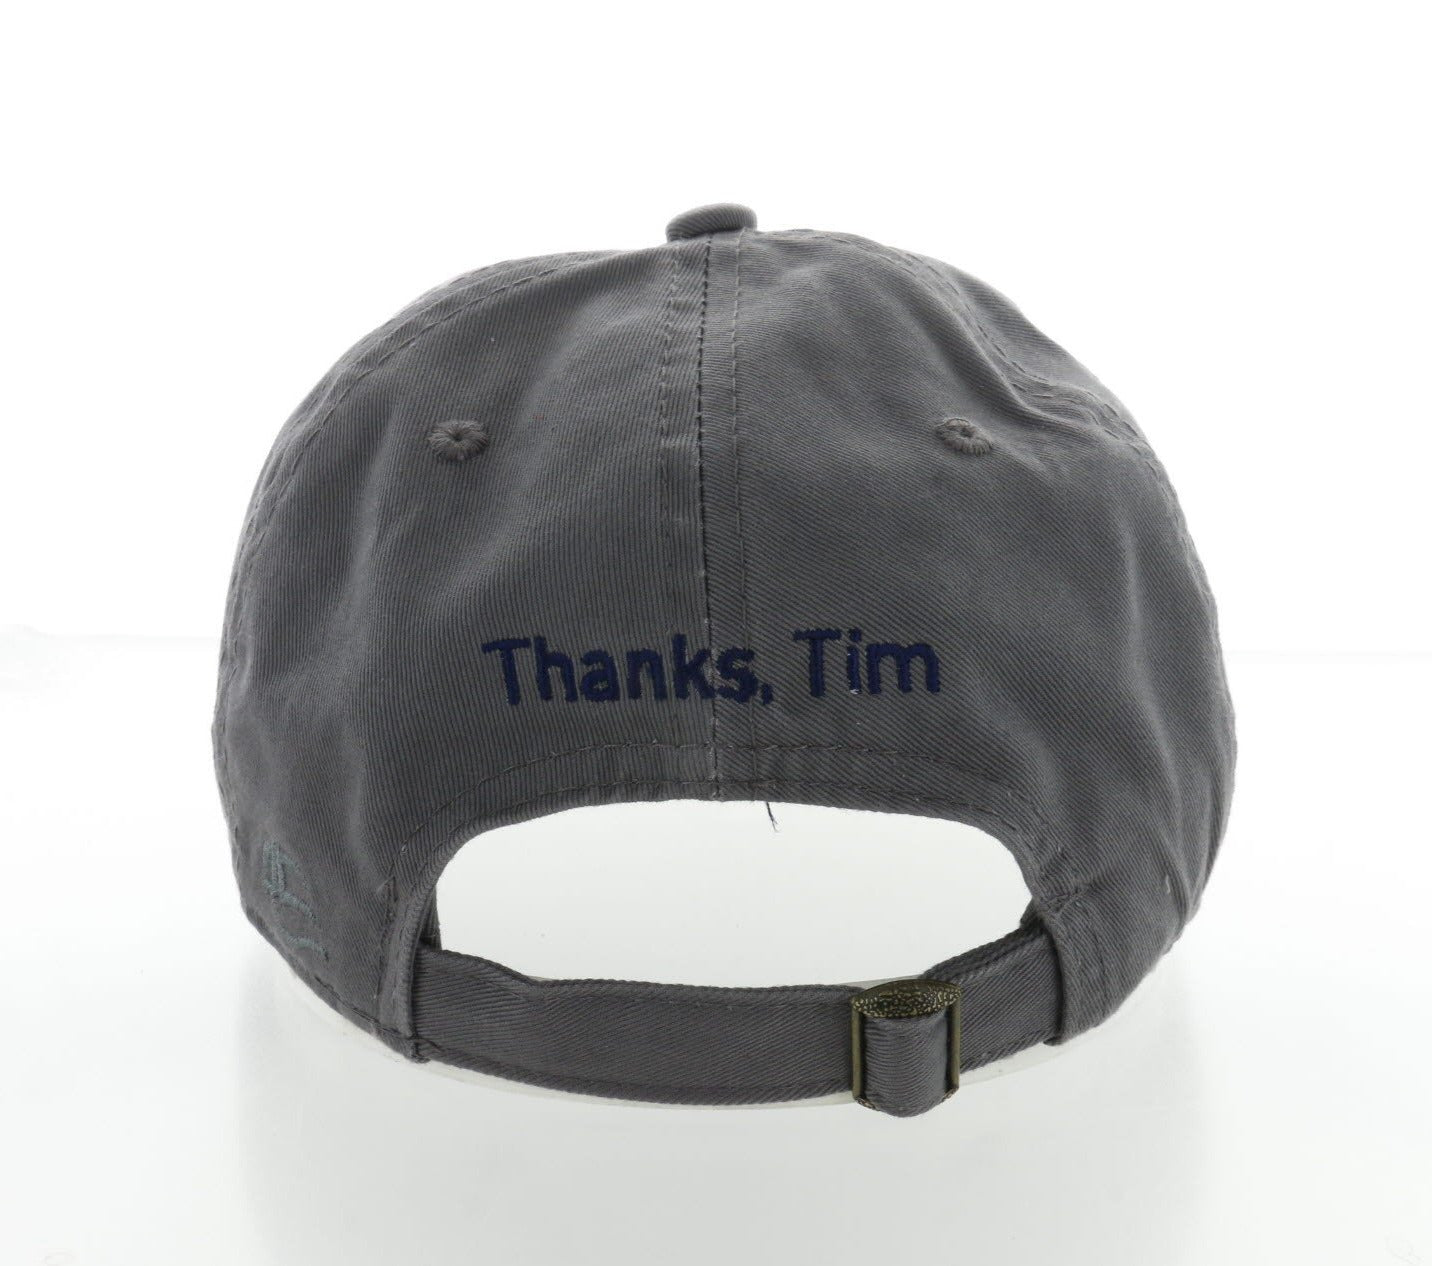 cotton twill baseball cap ball hat sun protection gray grey thanks, tim hashtag the cowboy national cowboy and western heritage museum logo